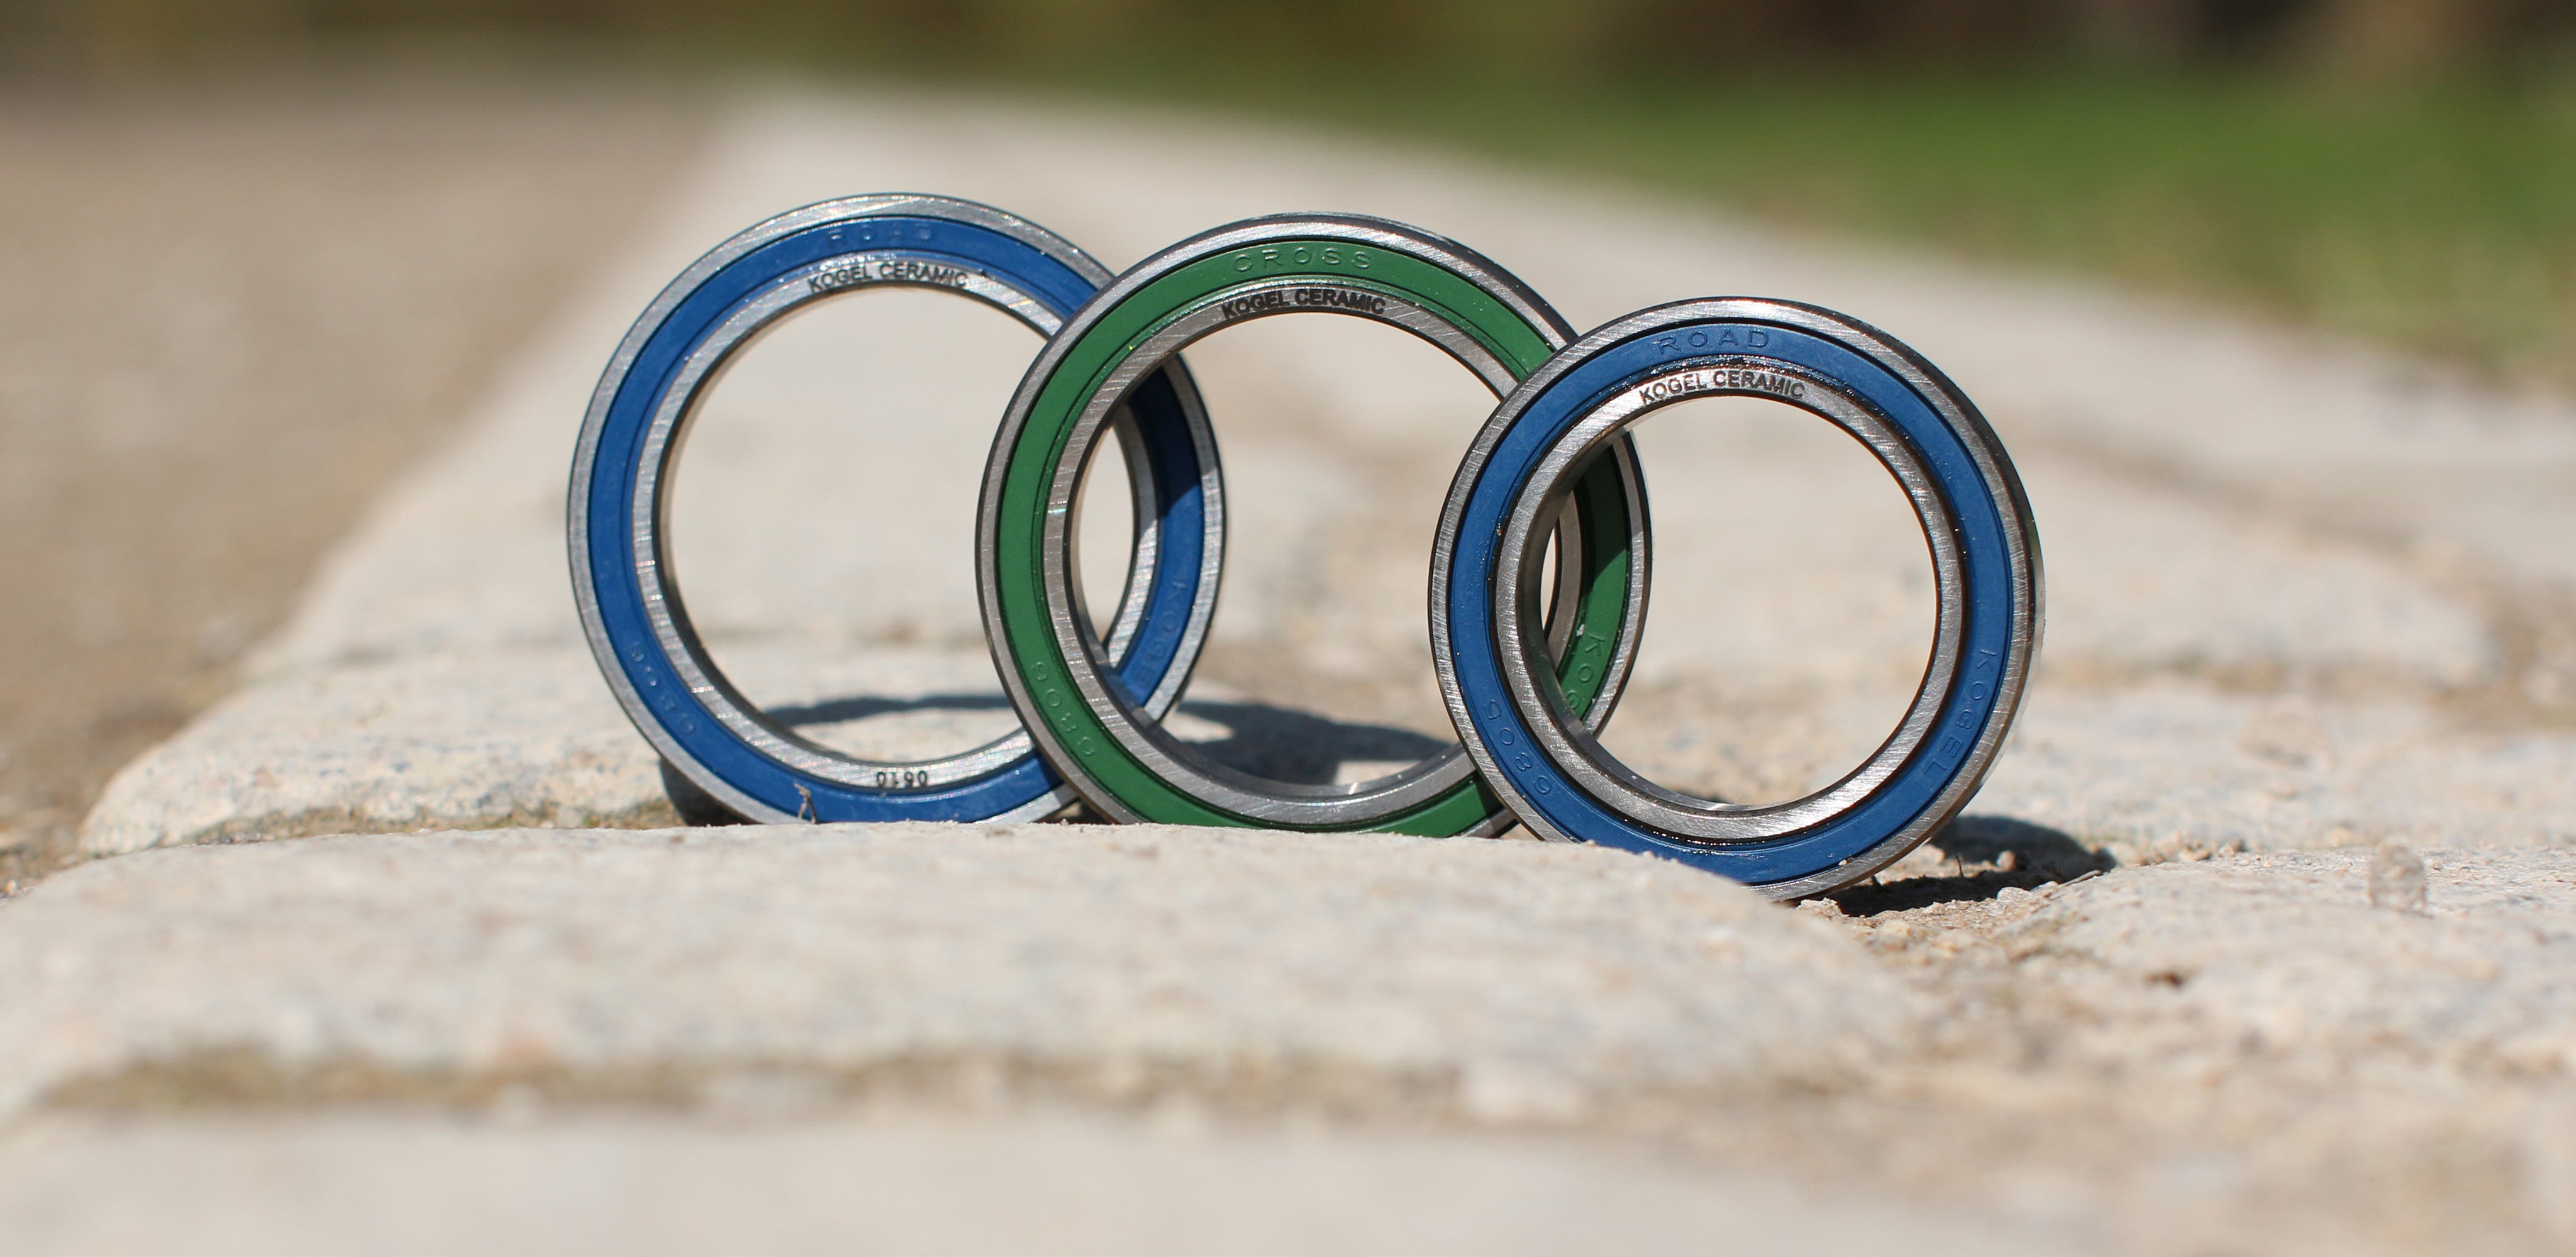 The lowest friction from ceramic bearings